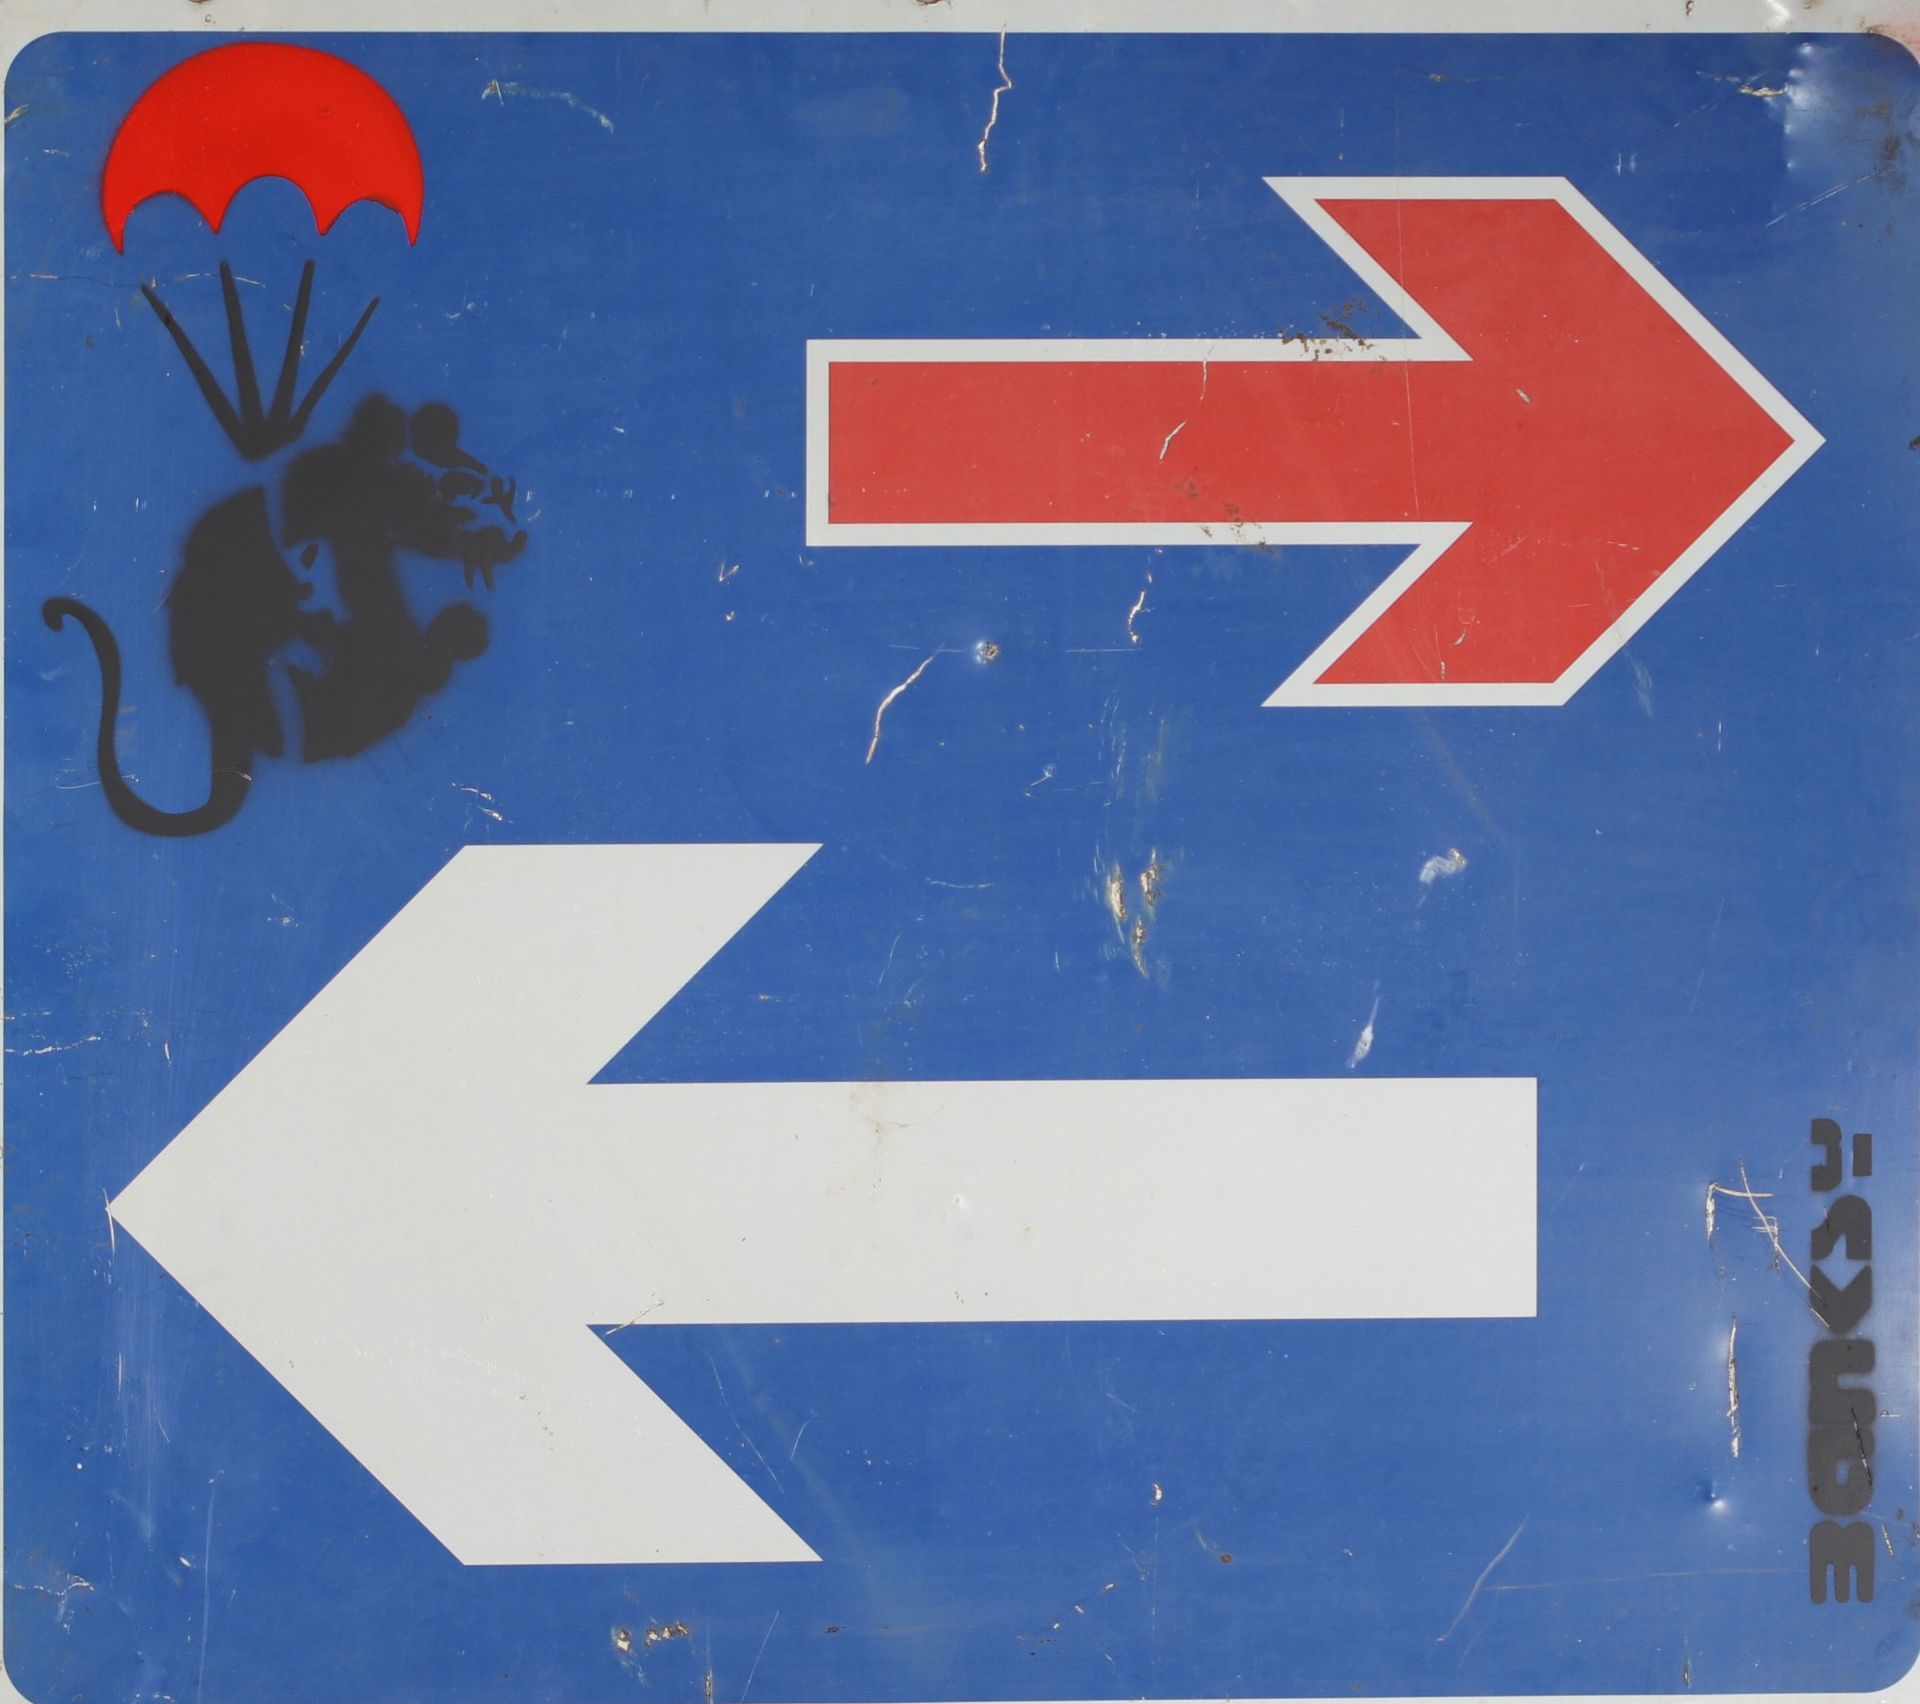 Banksy Parachuting Rat Road sign Stencil and paintings representing a black rat in a red parachute S